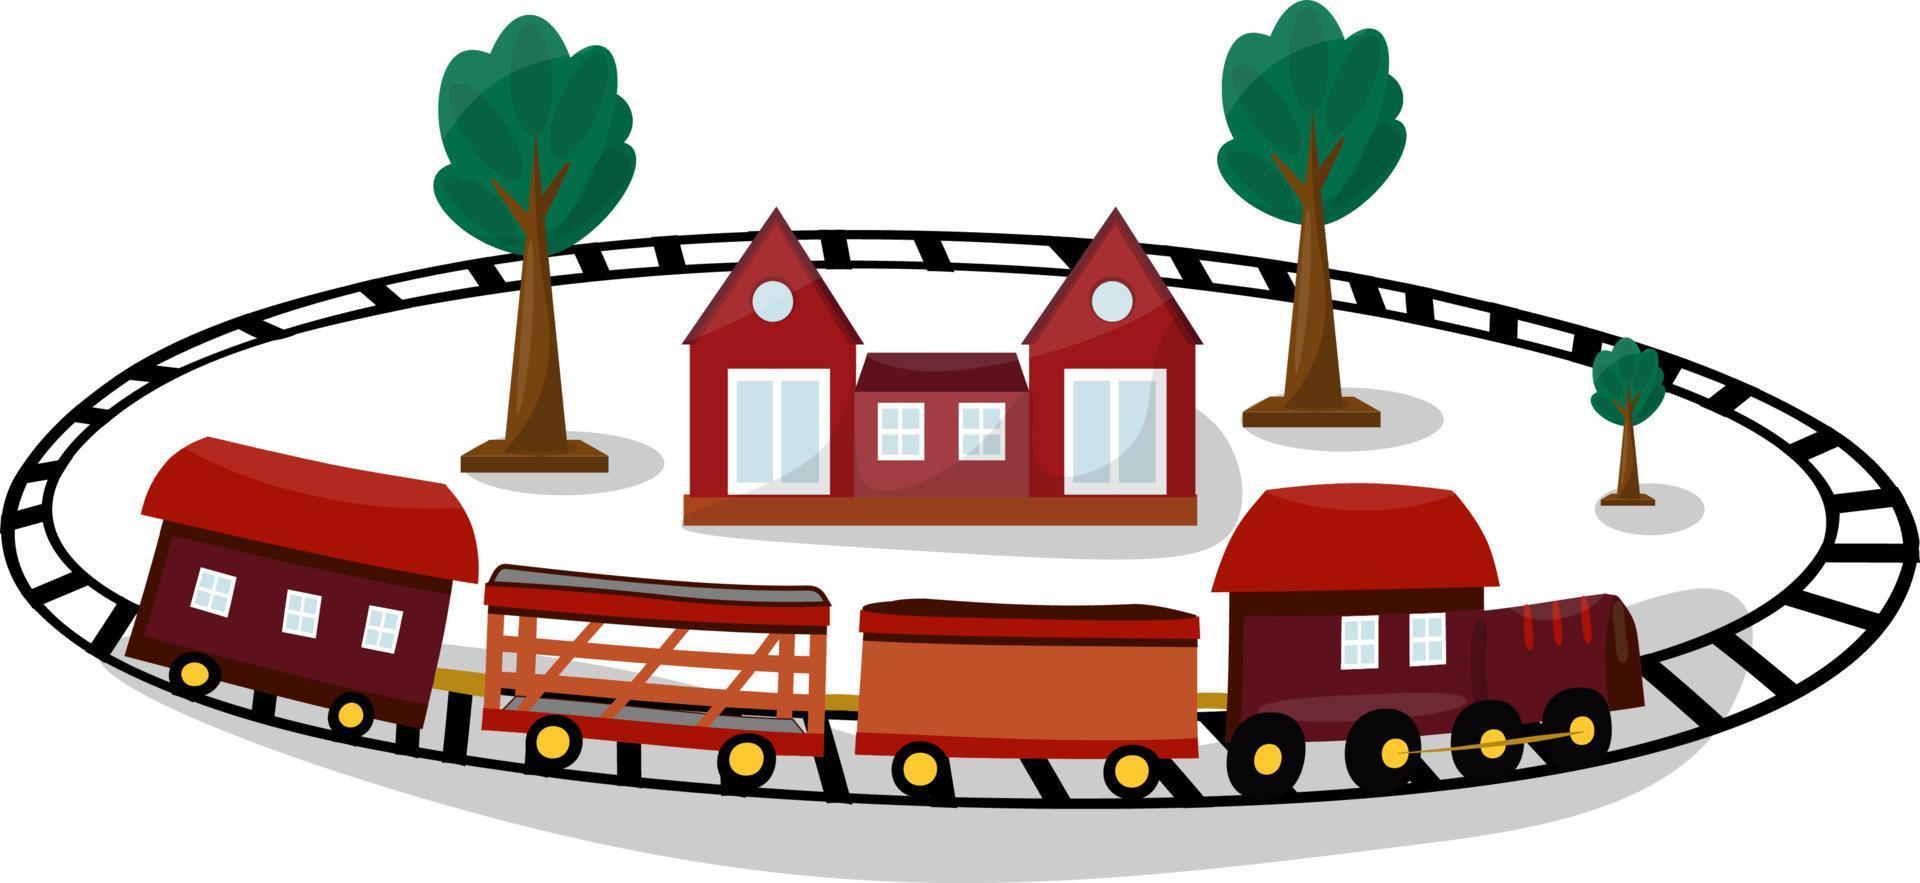 Toy railway. Train toy. Locomotive for kid. Cartoon engine, wagon, wheels and railway for child. Transport children game. Vector. vector